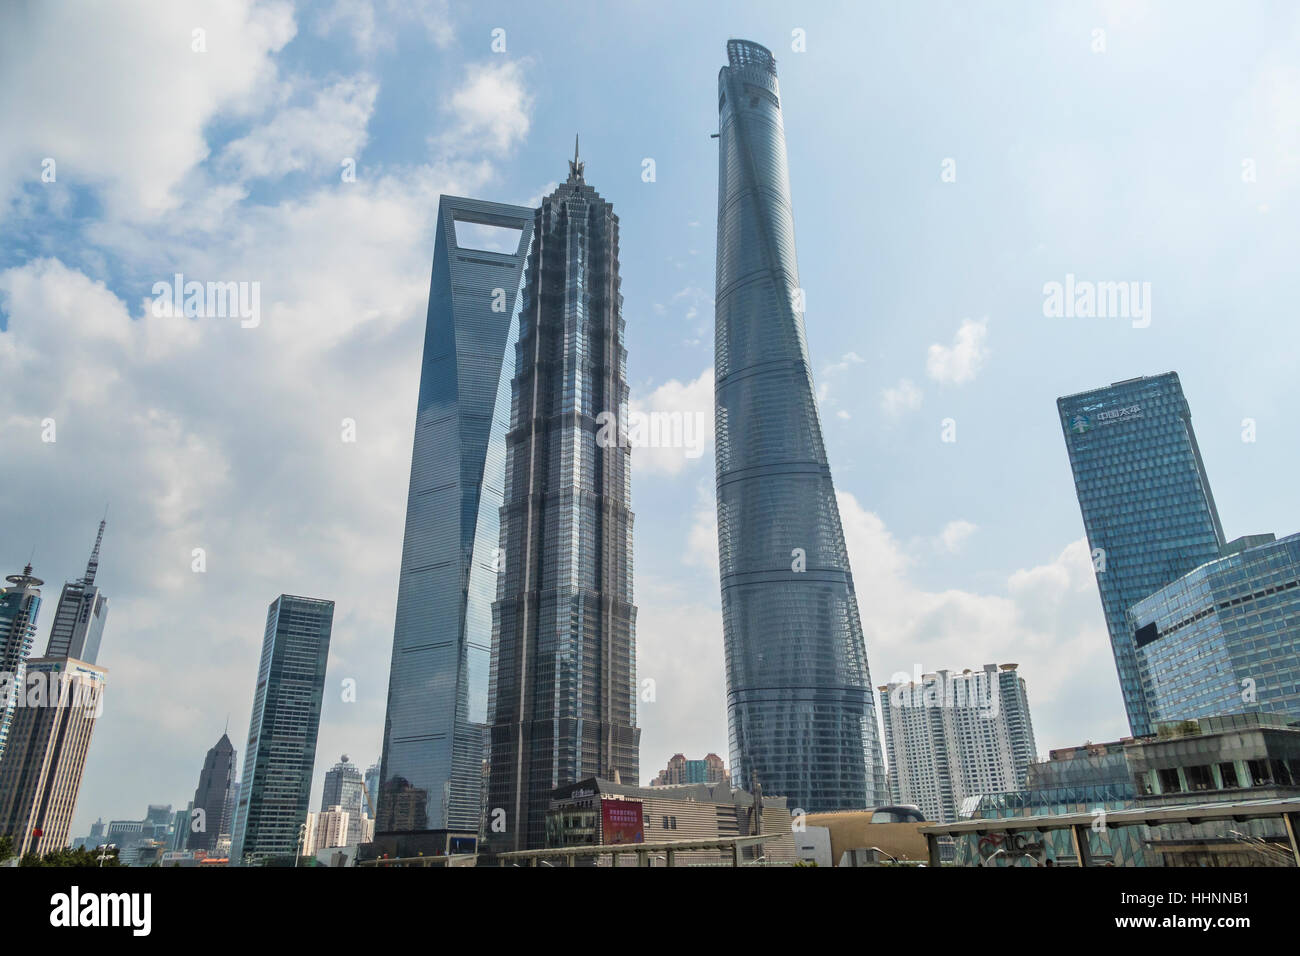 Skyscrapers of Pudong New Area, Shanghai, China Stock Photo